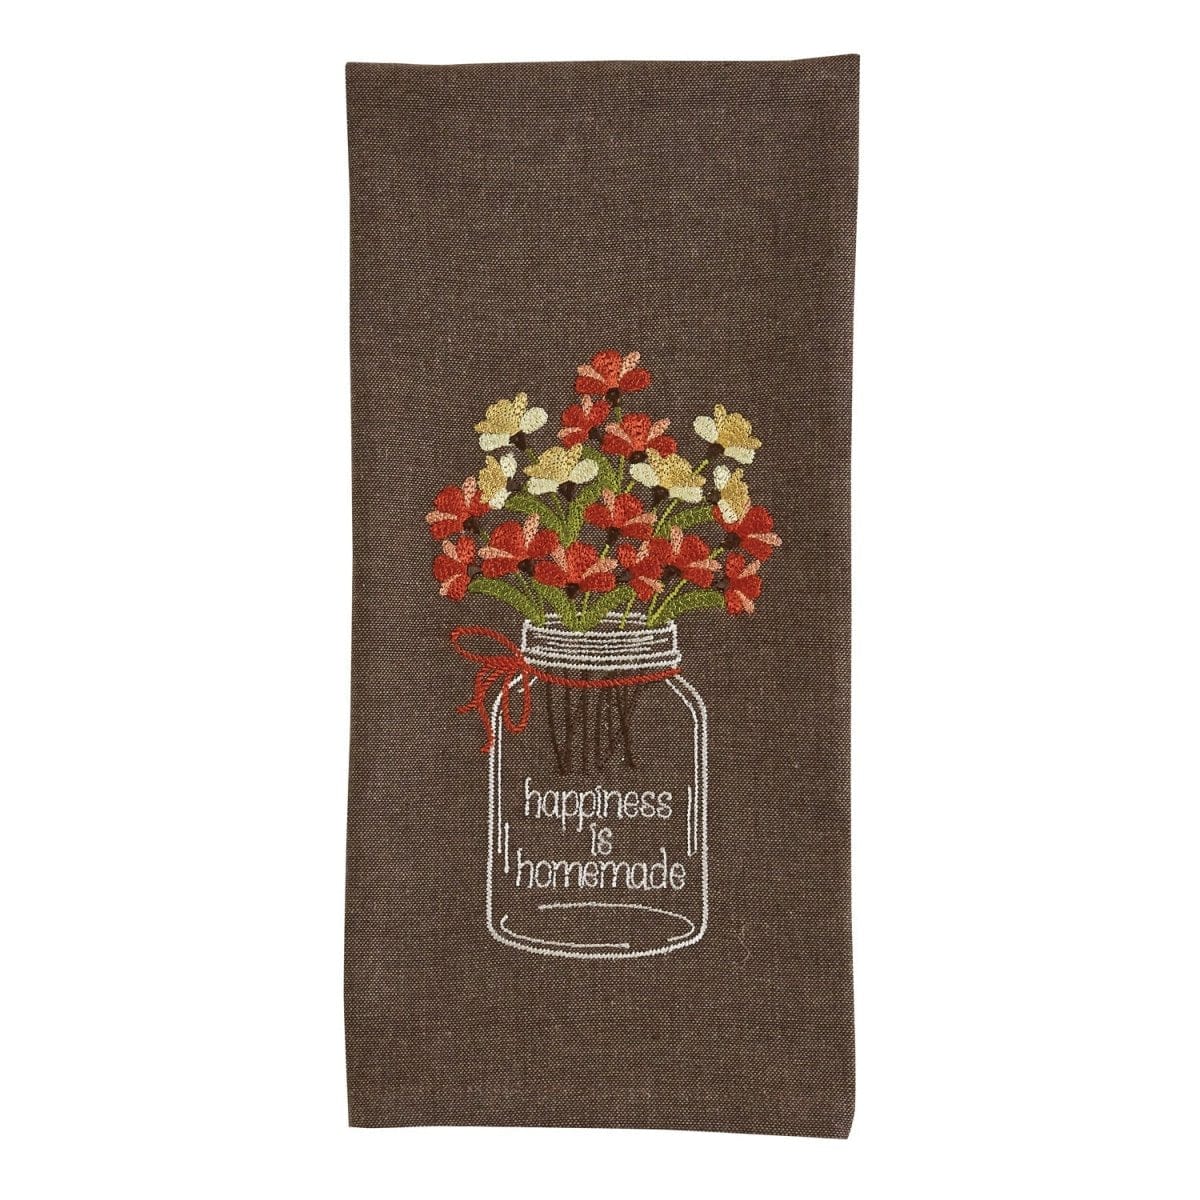 happiness is homemade Decorative Towel-Park Designs-The Village Merchant